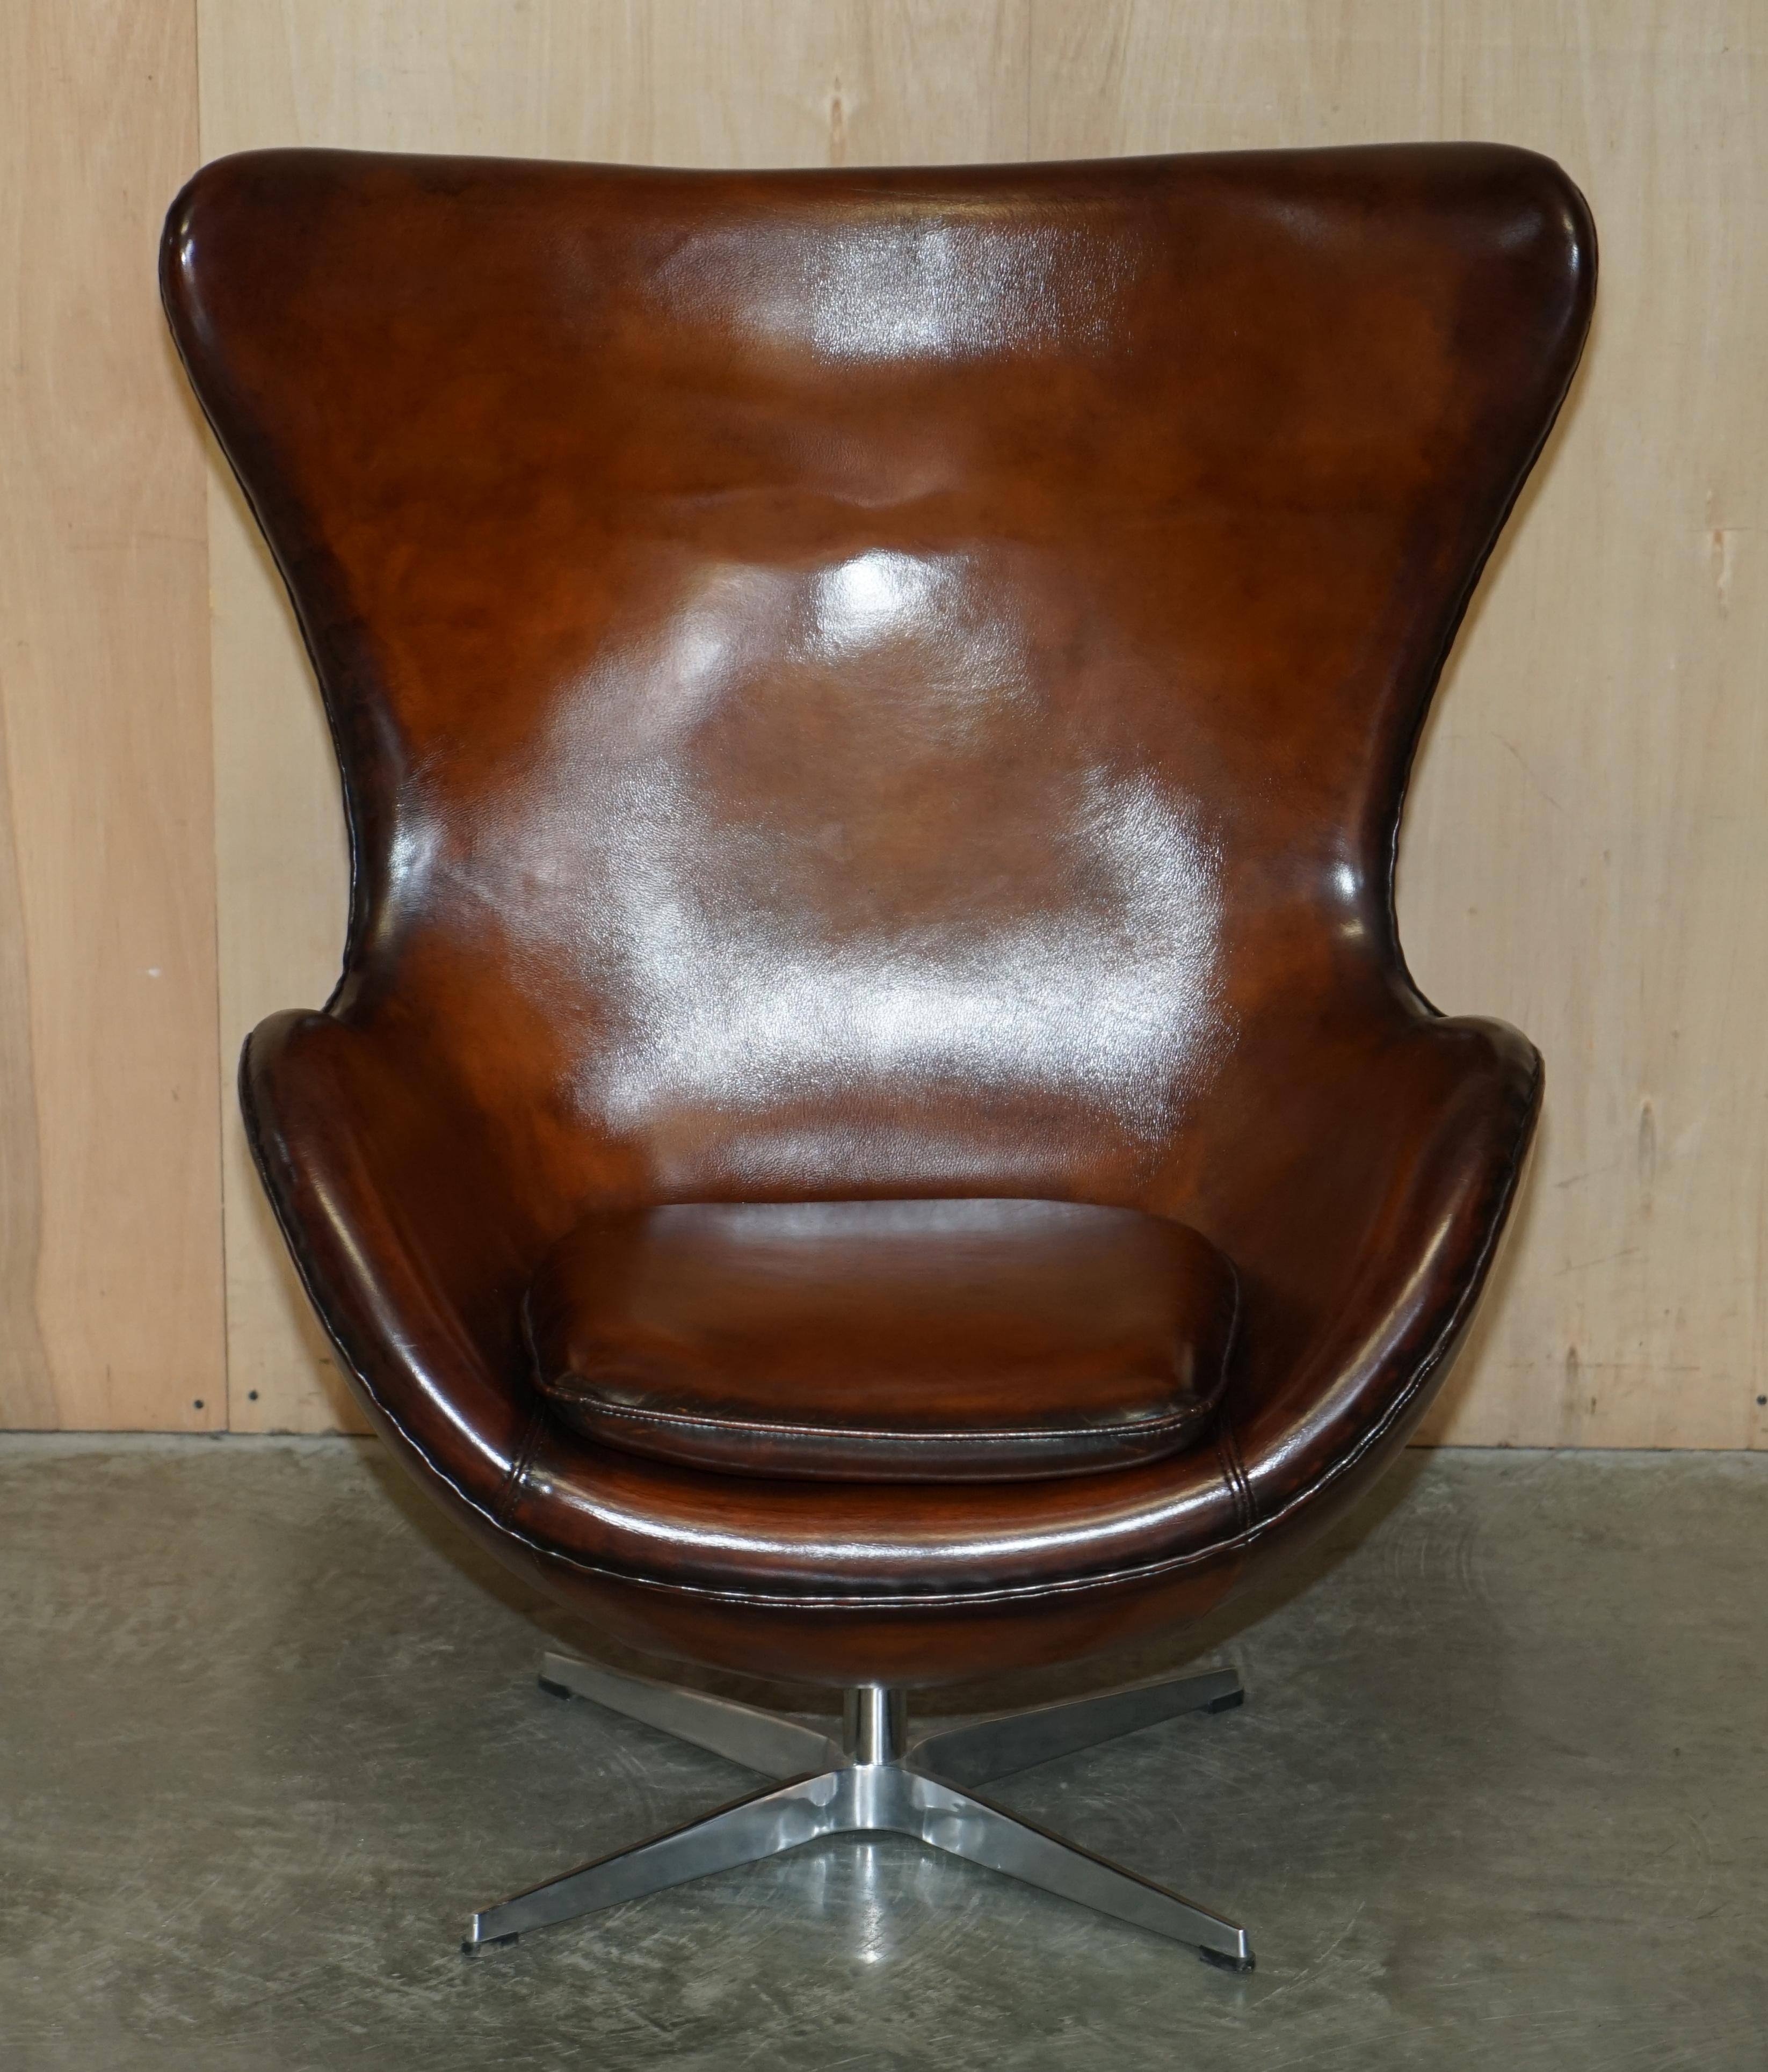 We are delighted to offer for sale this vintage, Fritz Hansen style, completely restored egg chair

I have listed this as 